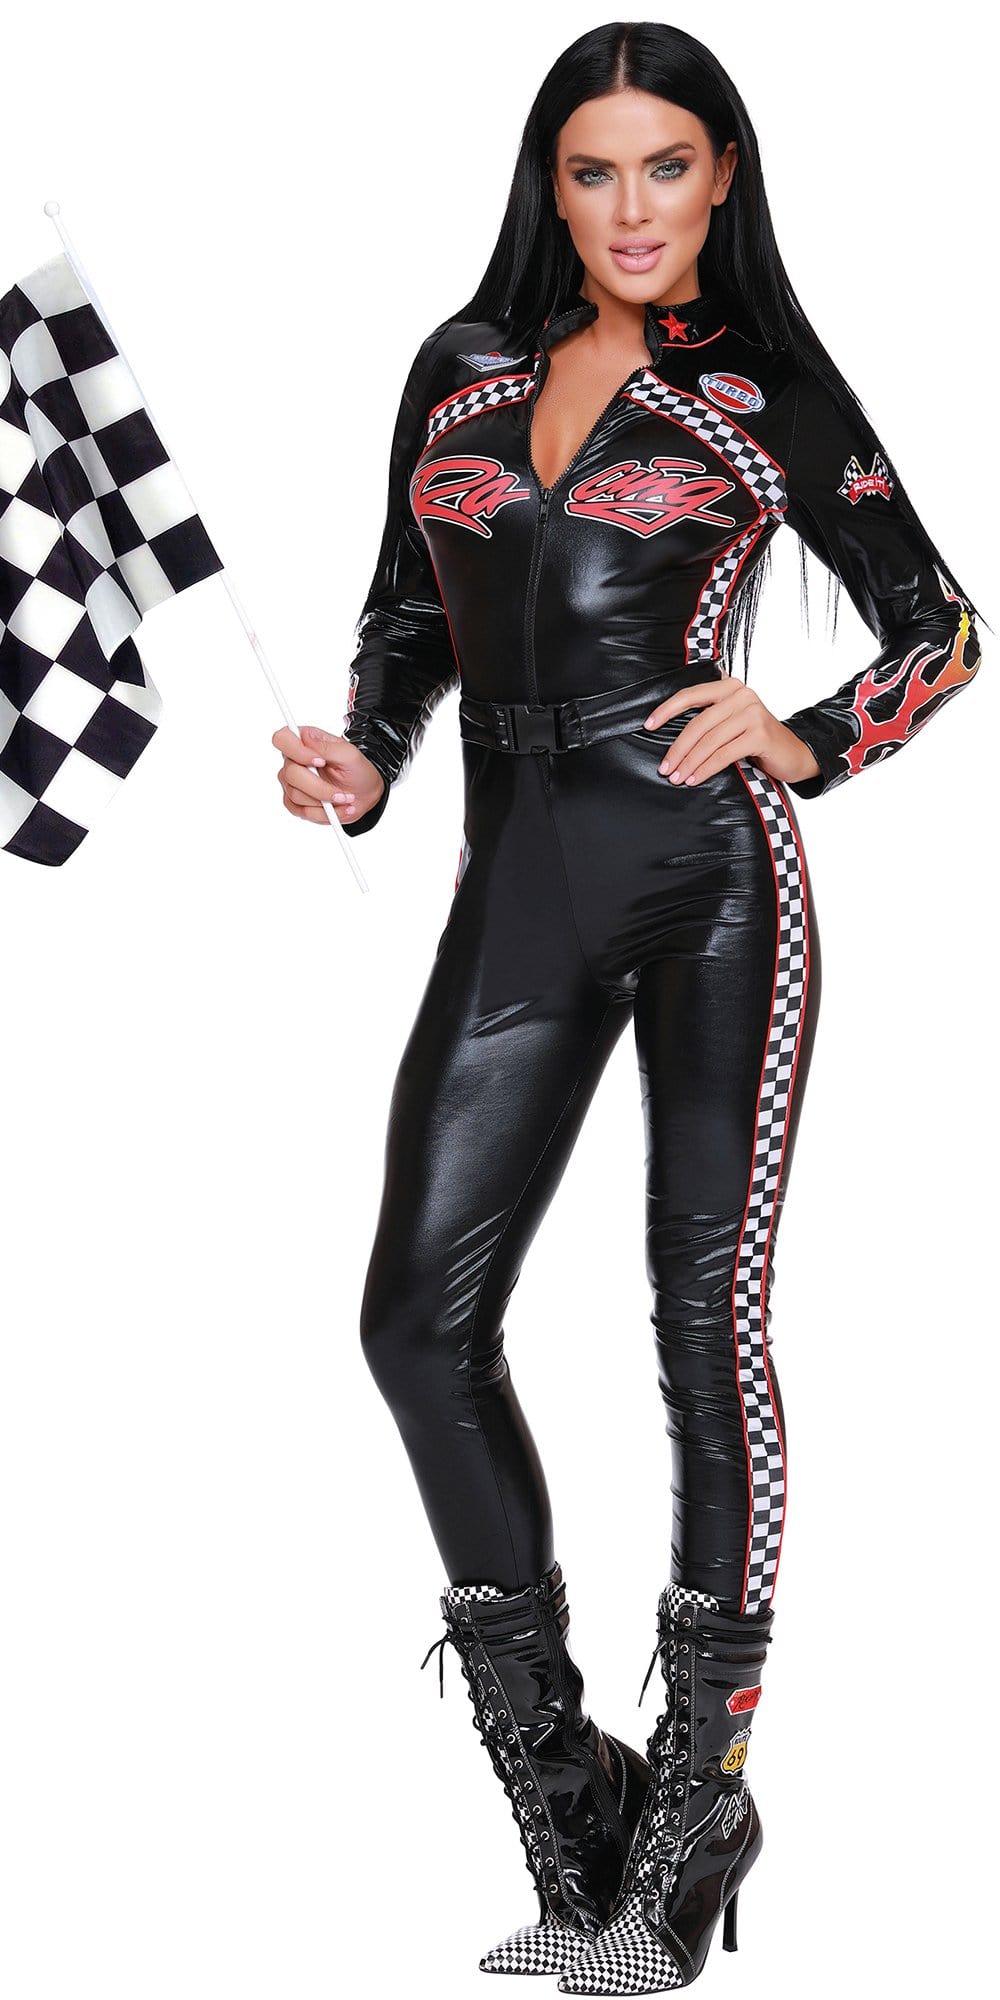 Sexy Start Your Engines Women's Costume Musotica.com